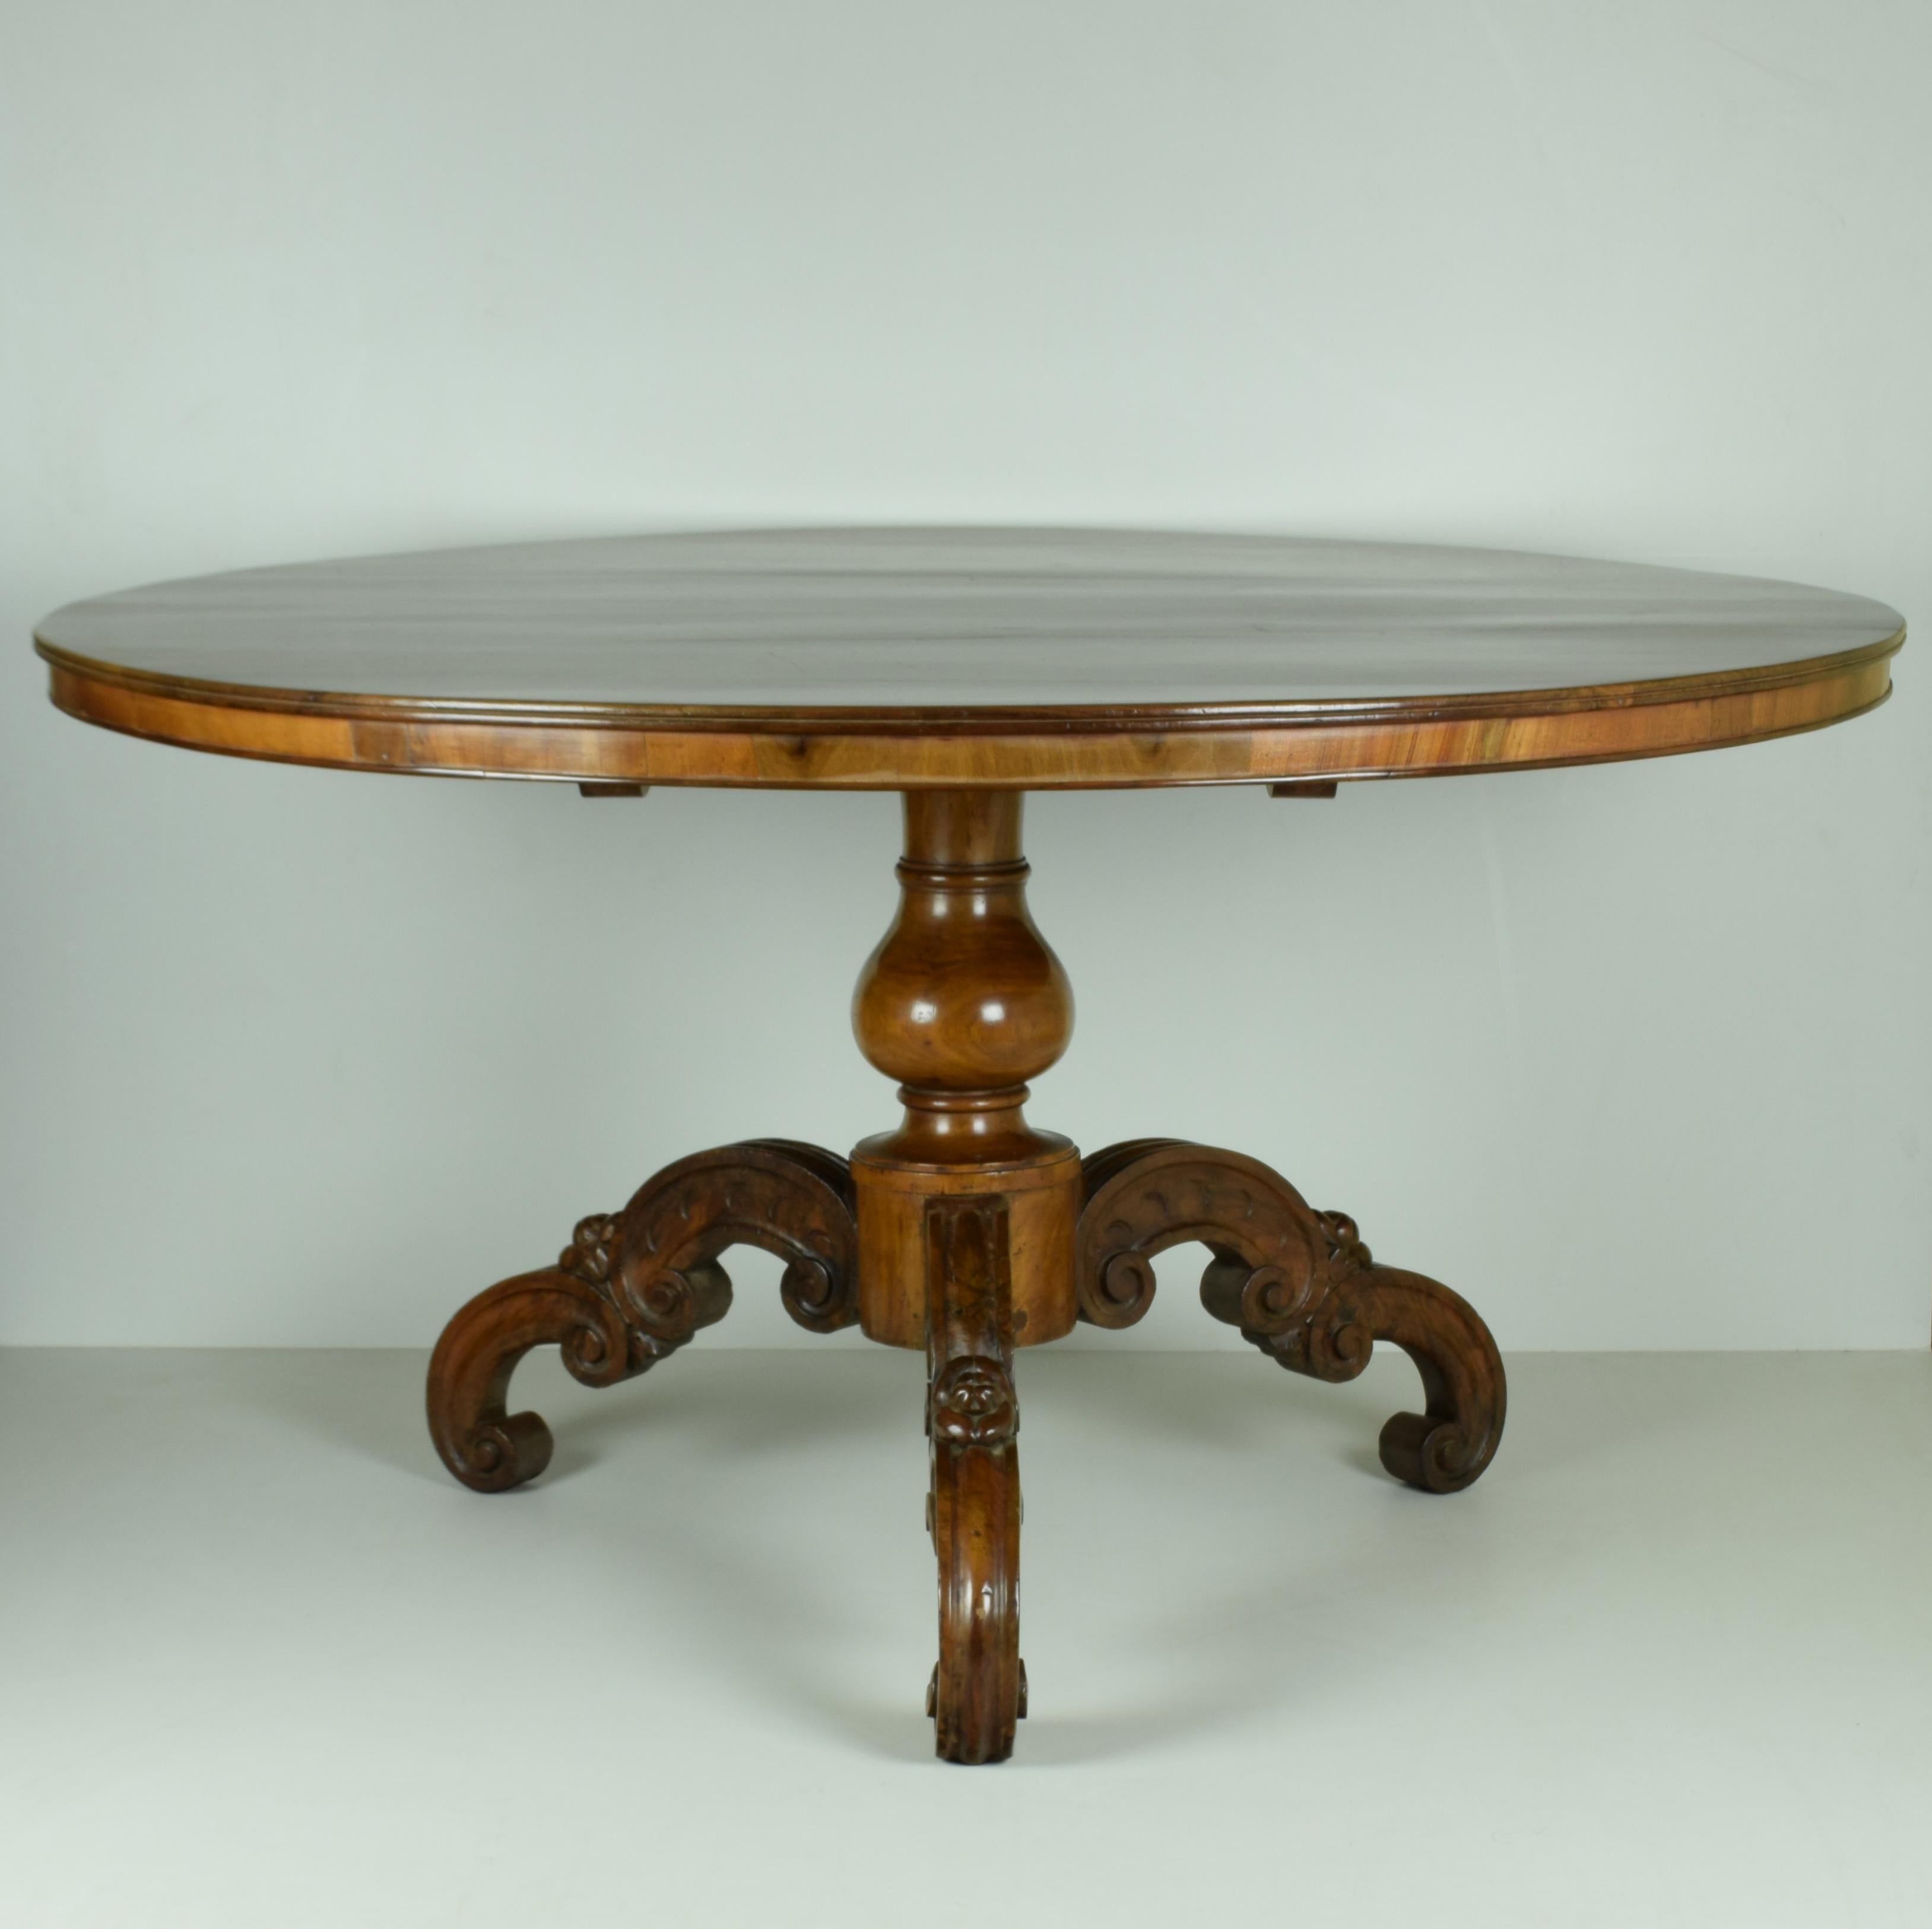 In finely hand carved three-legged solid walnut.
Small plate band covered with walnut veneer with frame.
Liguria, First half '800
Dimensions: Diameter 143 Height 78 cm circa.